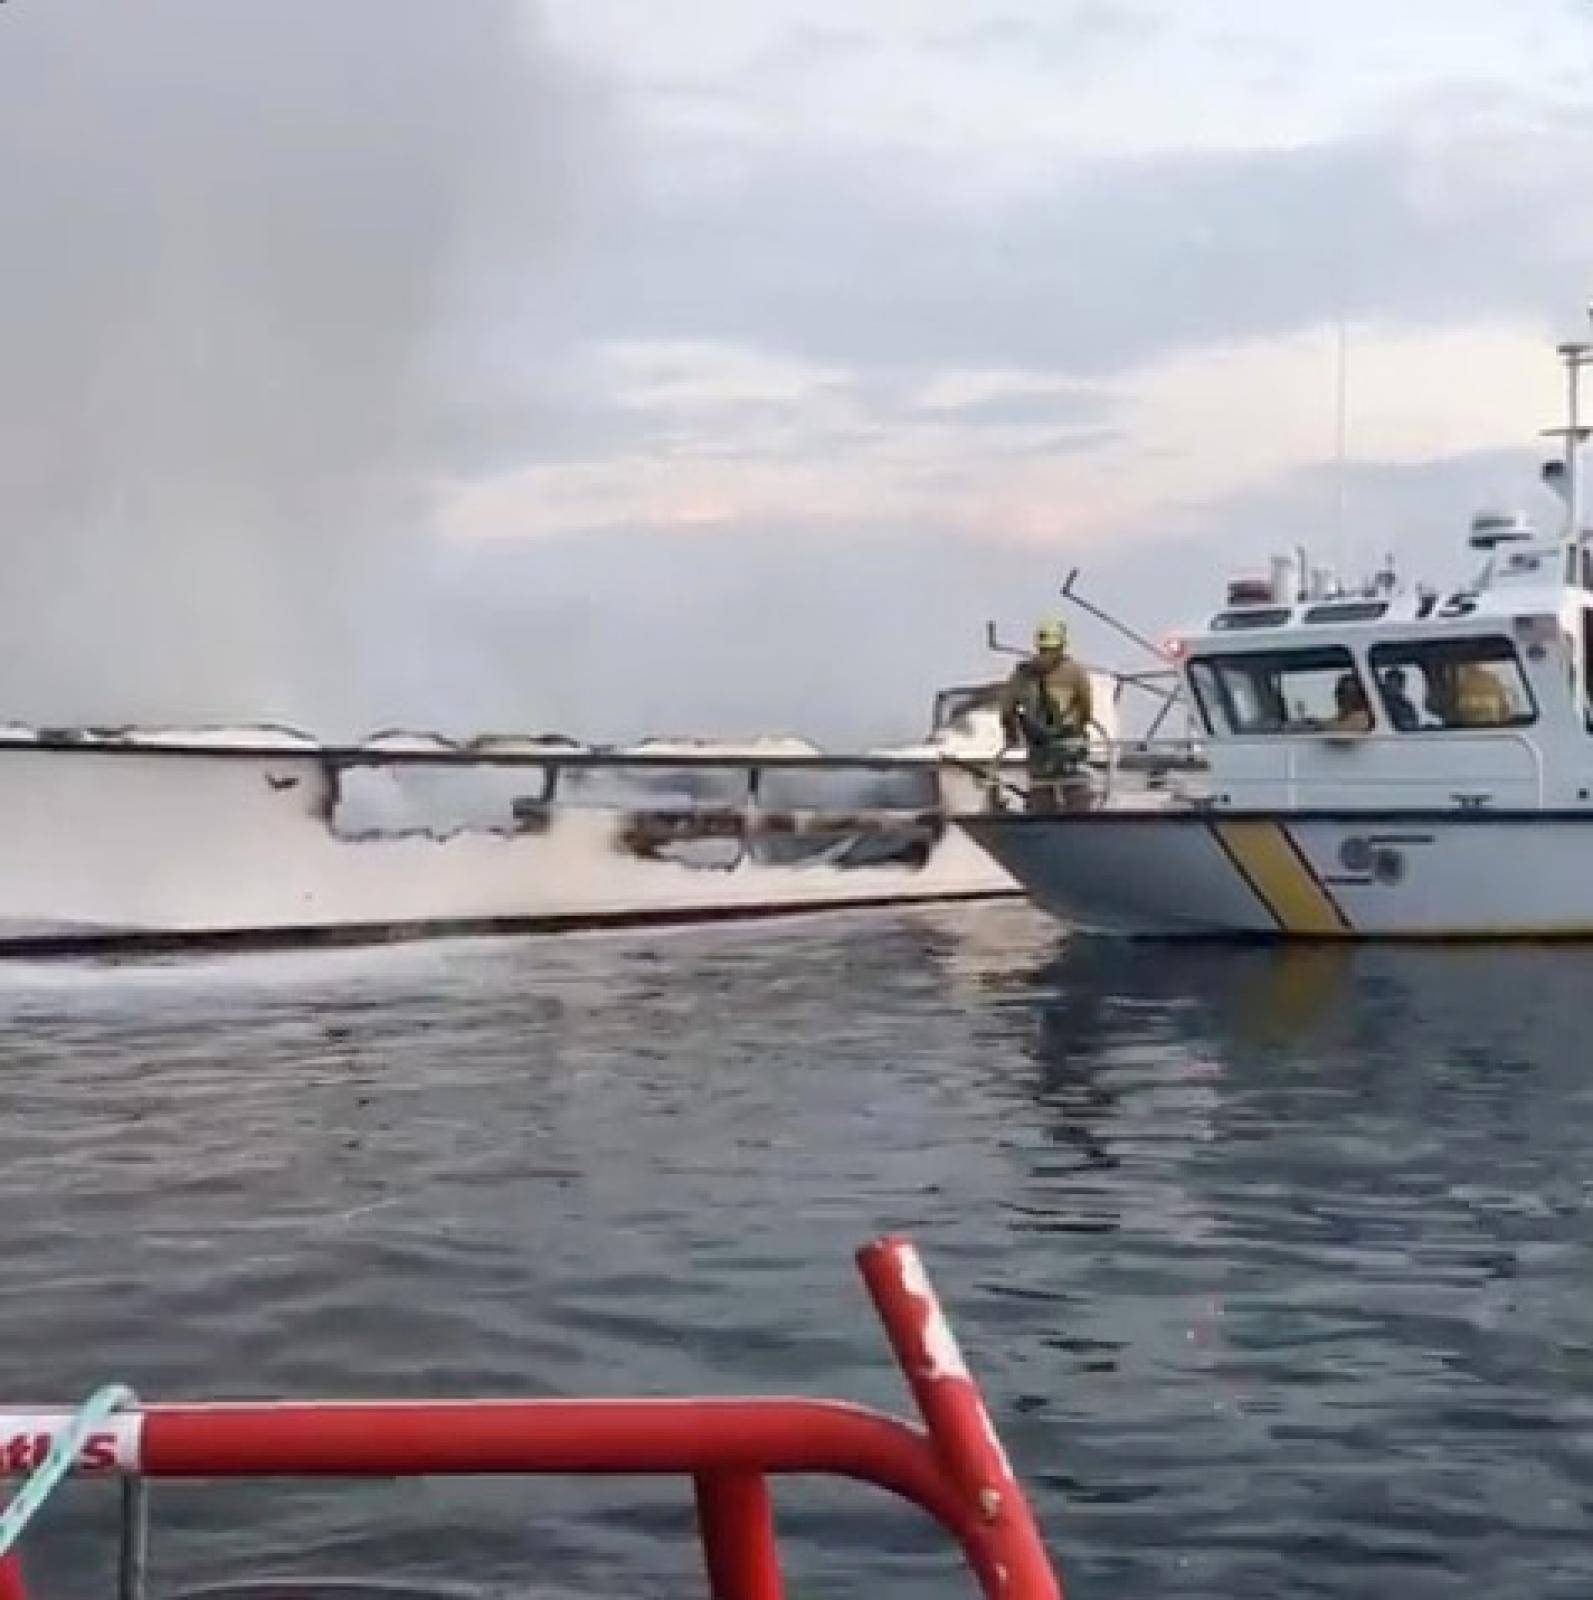 Social media video grab of the damaged Conception commercial diving vessel after a fire broke out, near Santa Cruz Island